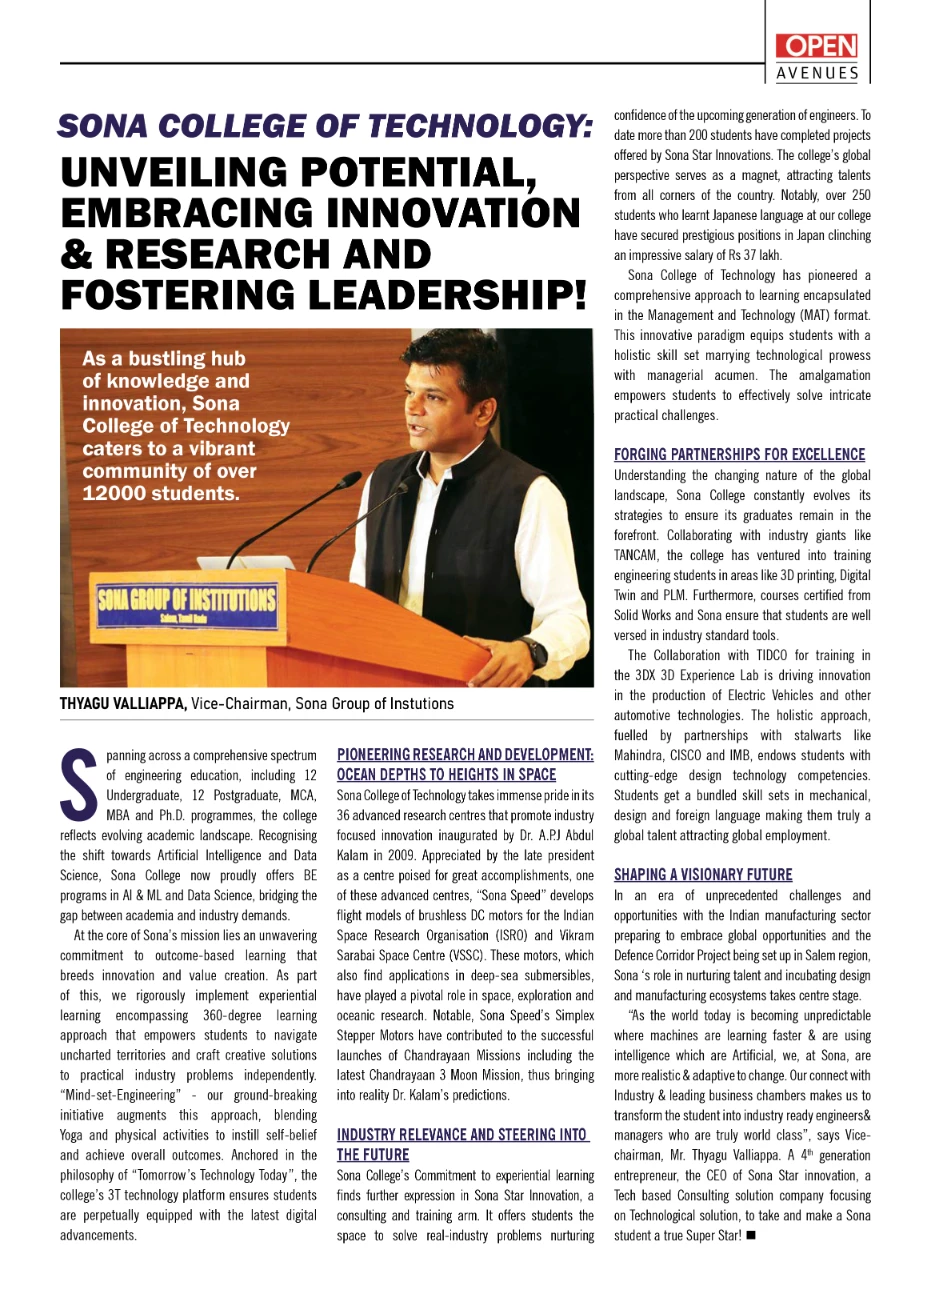 Sonatech : Unveiling Potential,Embracing Innovation & Research and Fostering Leadership! says Mr.Thyagu Valliappa